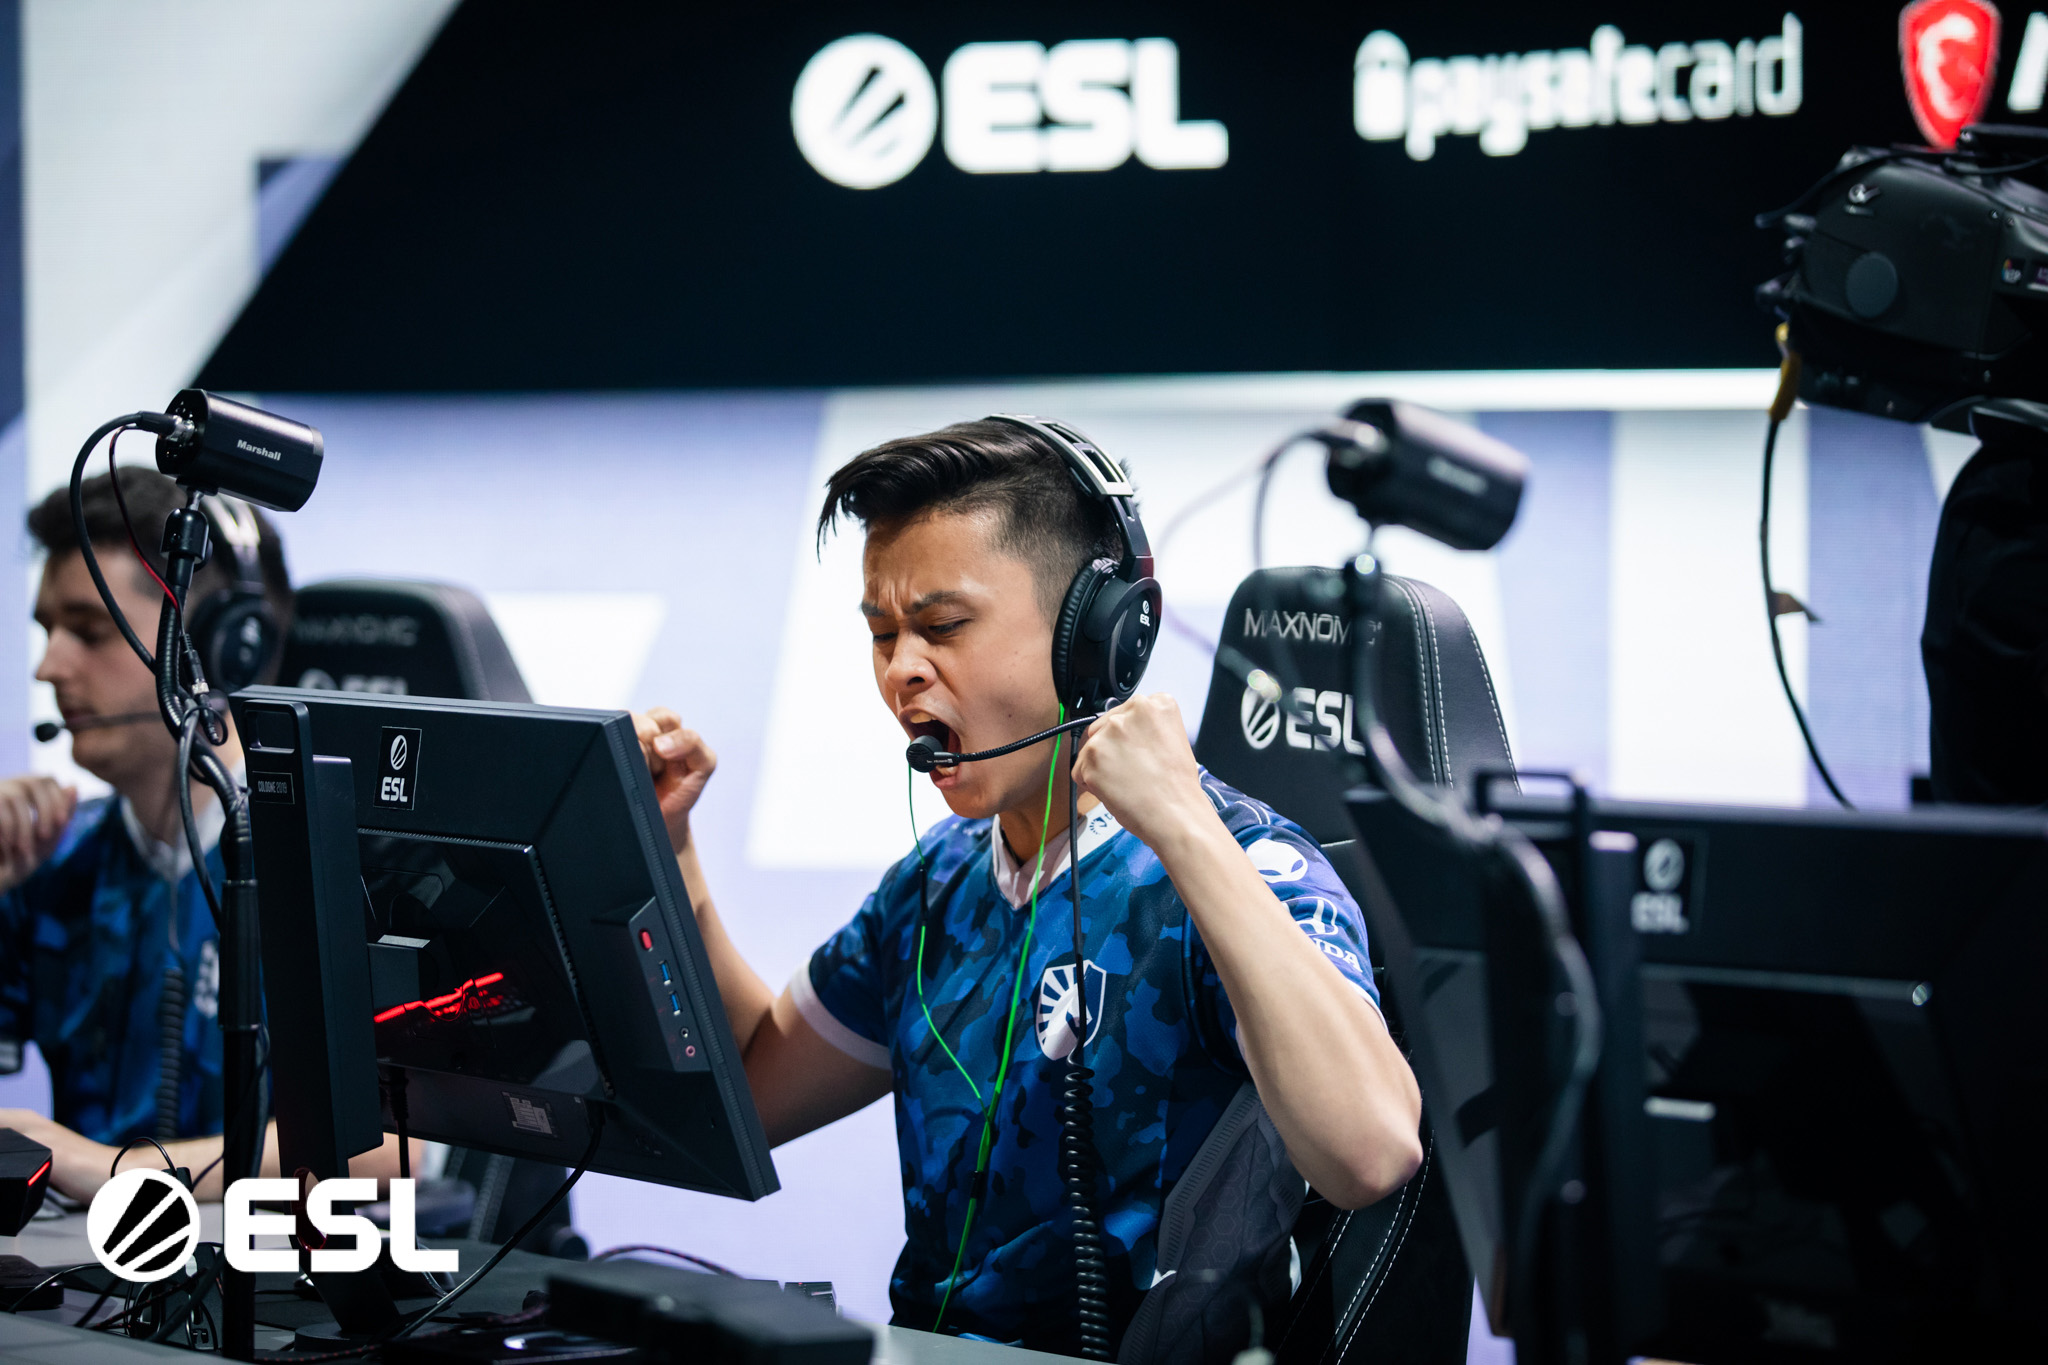 Team Liquid’s Jacky “Stewie2k” Yip celebrates winning a round of Counter-Strike: Global Offensive at ESL Cologne 2019.